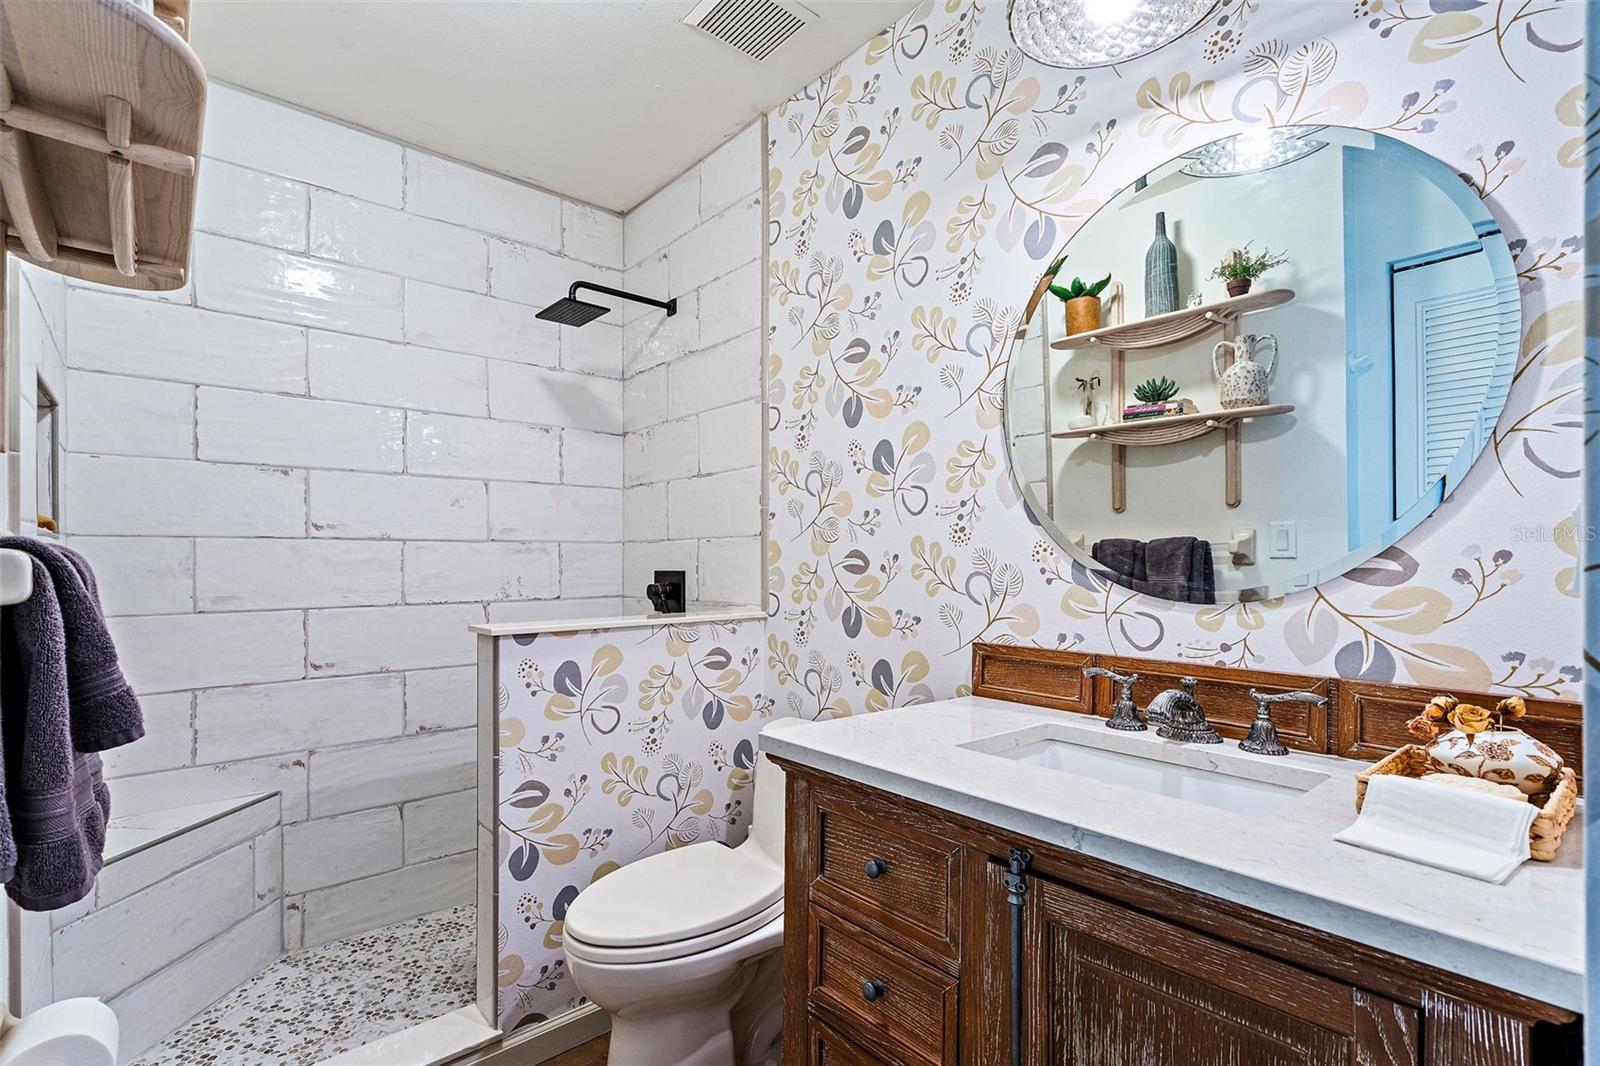 Guest Bathroom Has a Large Vanity and Beautiful Walk-in Shower with Custom Tiles